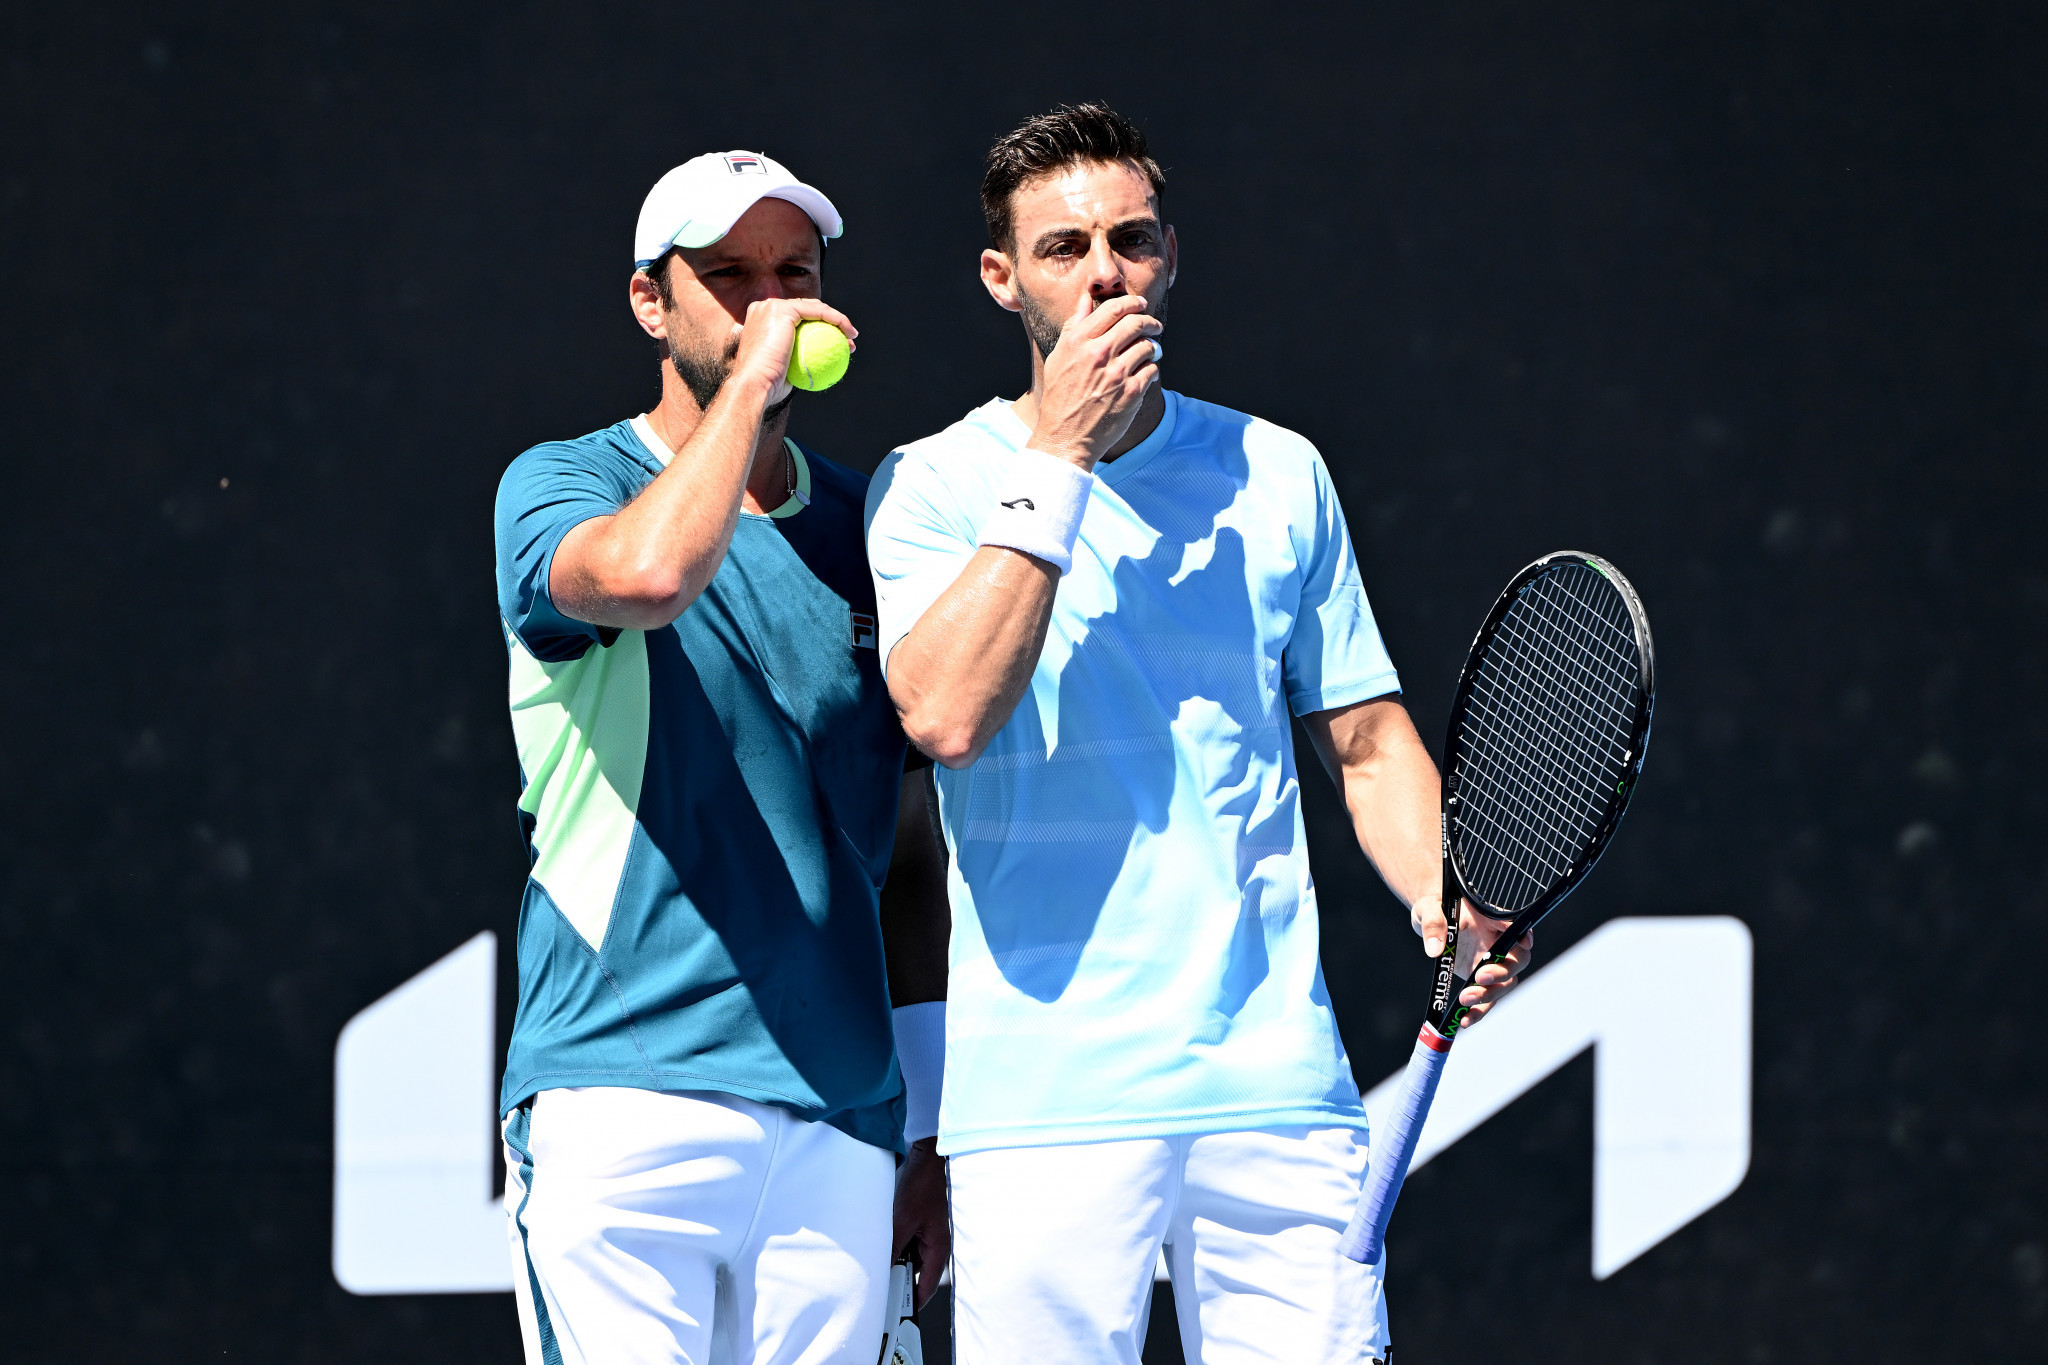 Marcel Granollers, right, of Spain and Horacio Zeballos of Argentina dispatched Australia's John Peers and Slovakian Filip Polášek 7-6, 6-4 to advance to the men's doubles semi-finals ©Getty Images